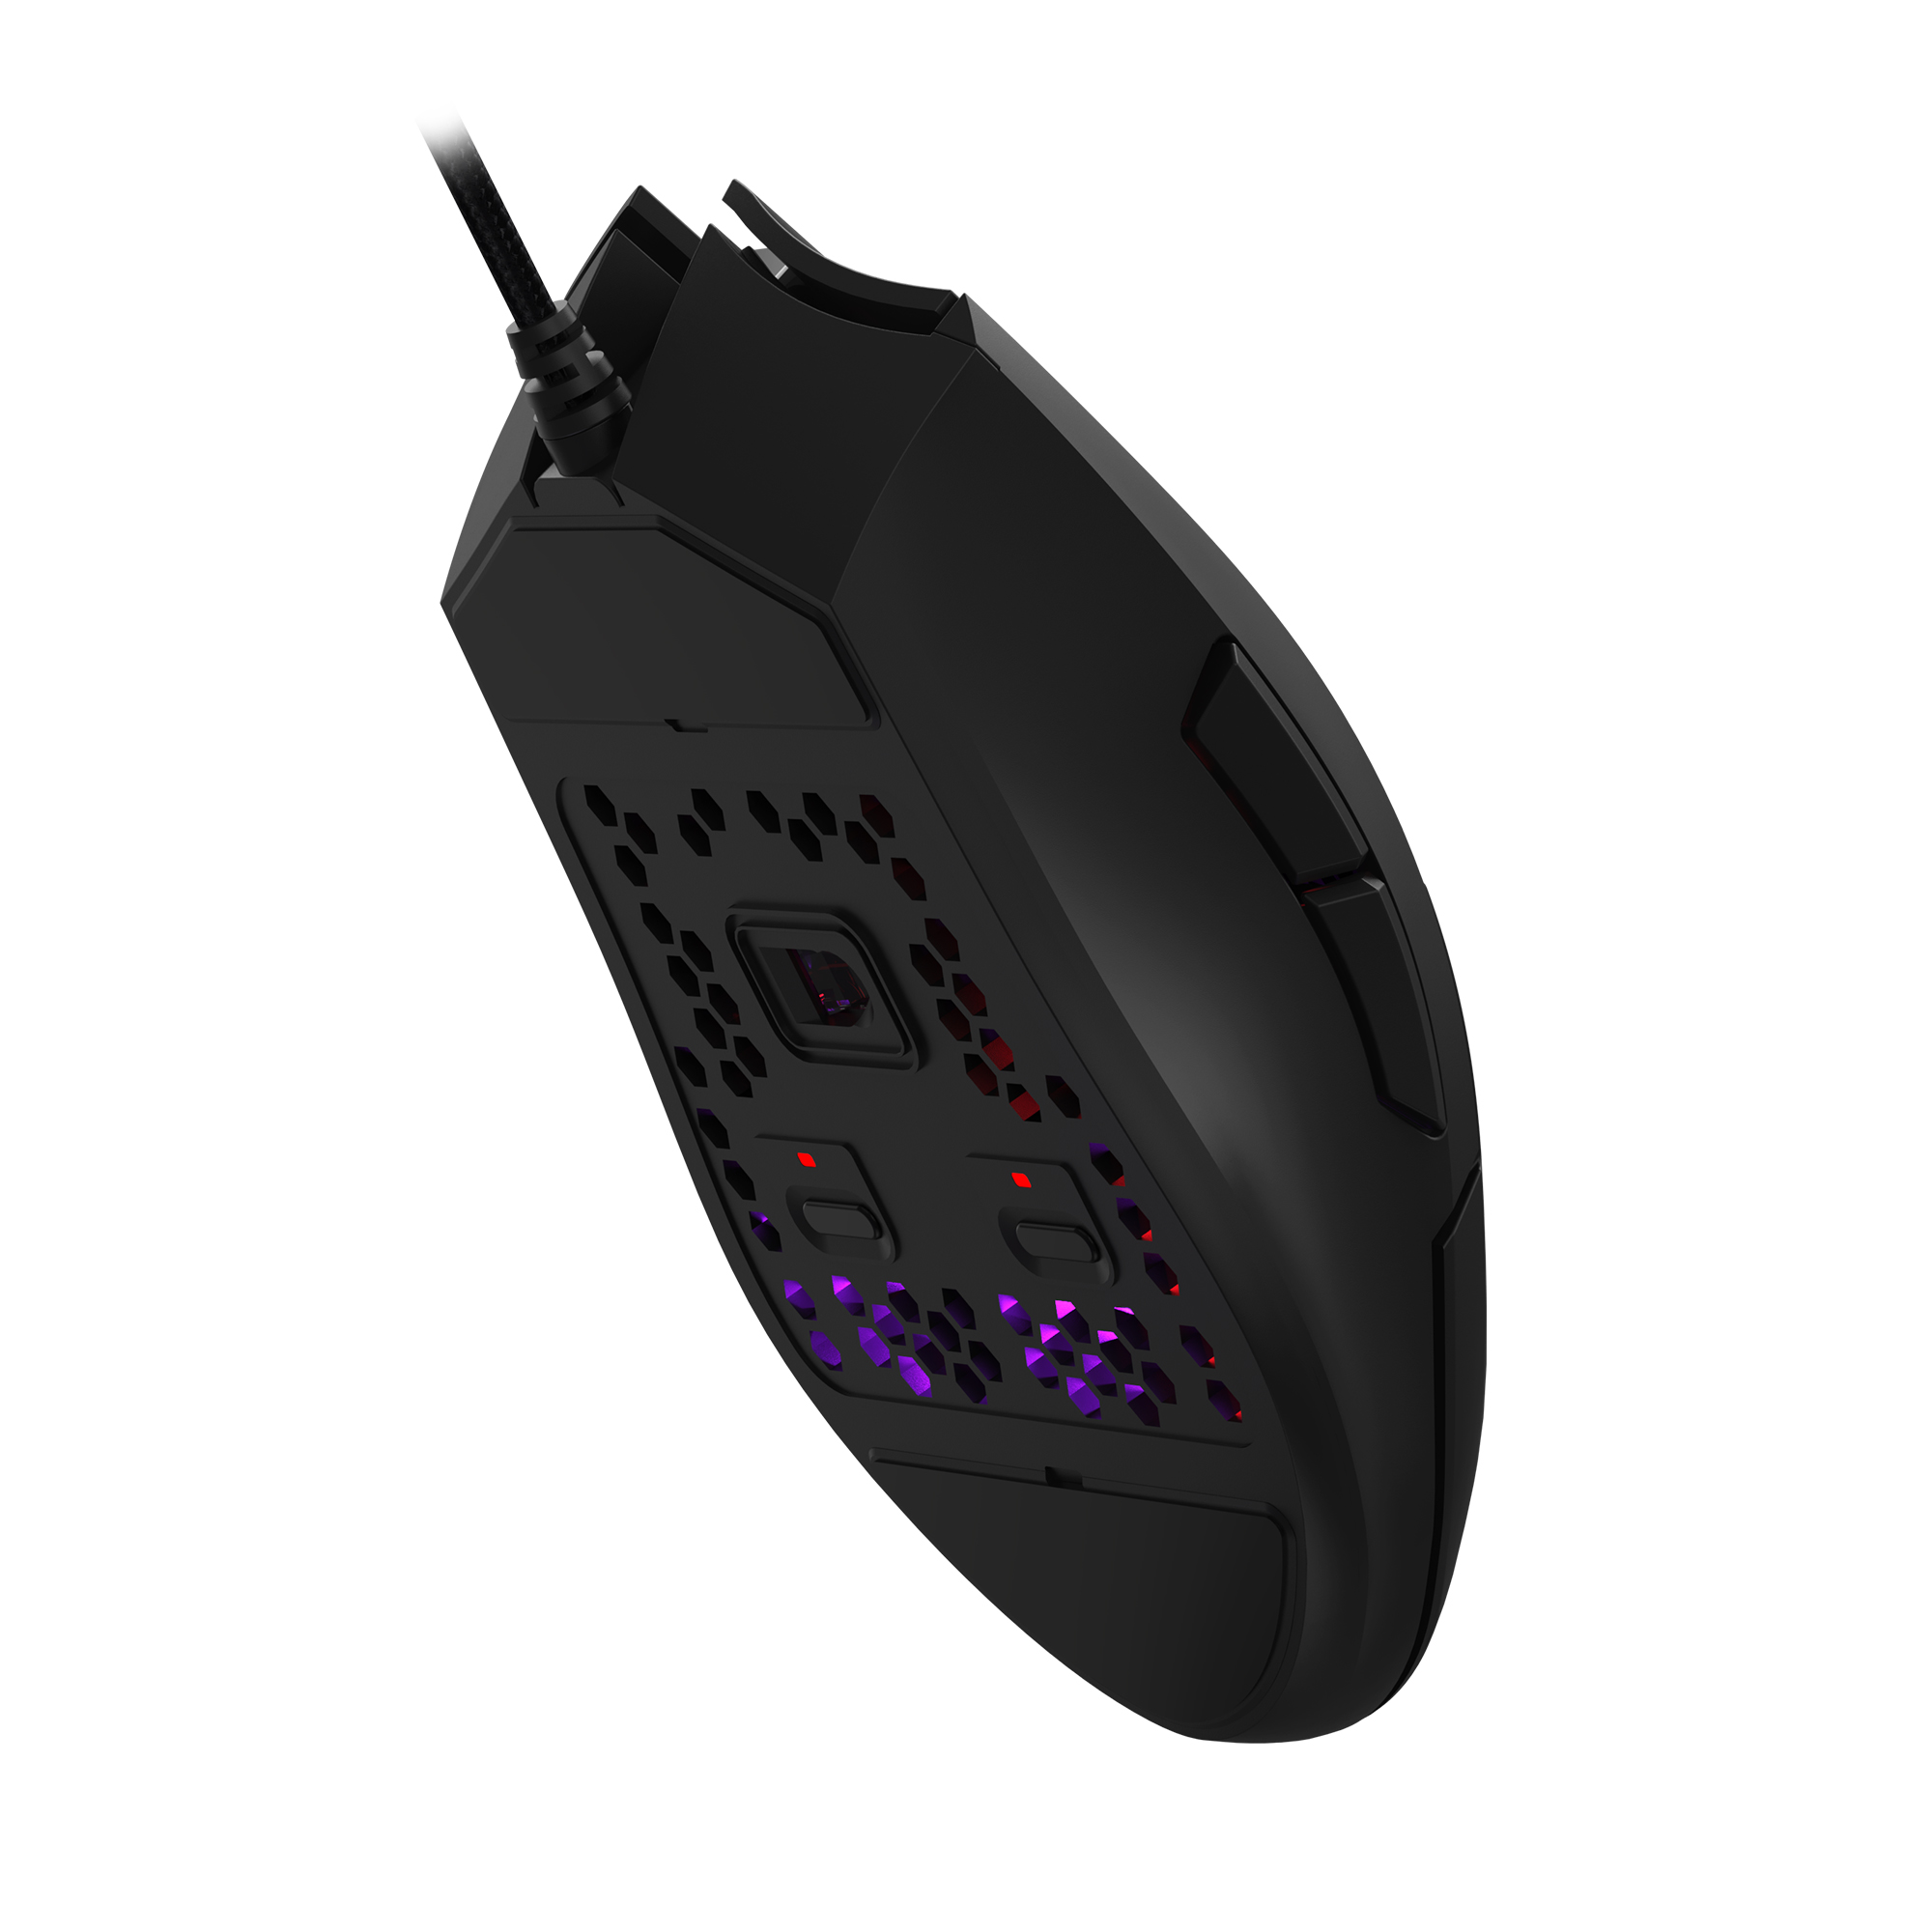 Blacklisted device bloody mouse a4tech rust решение фото 43